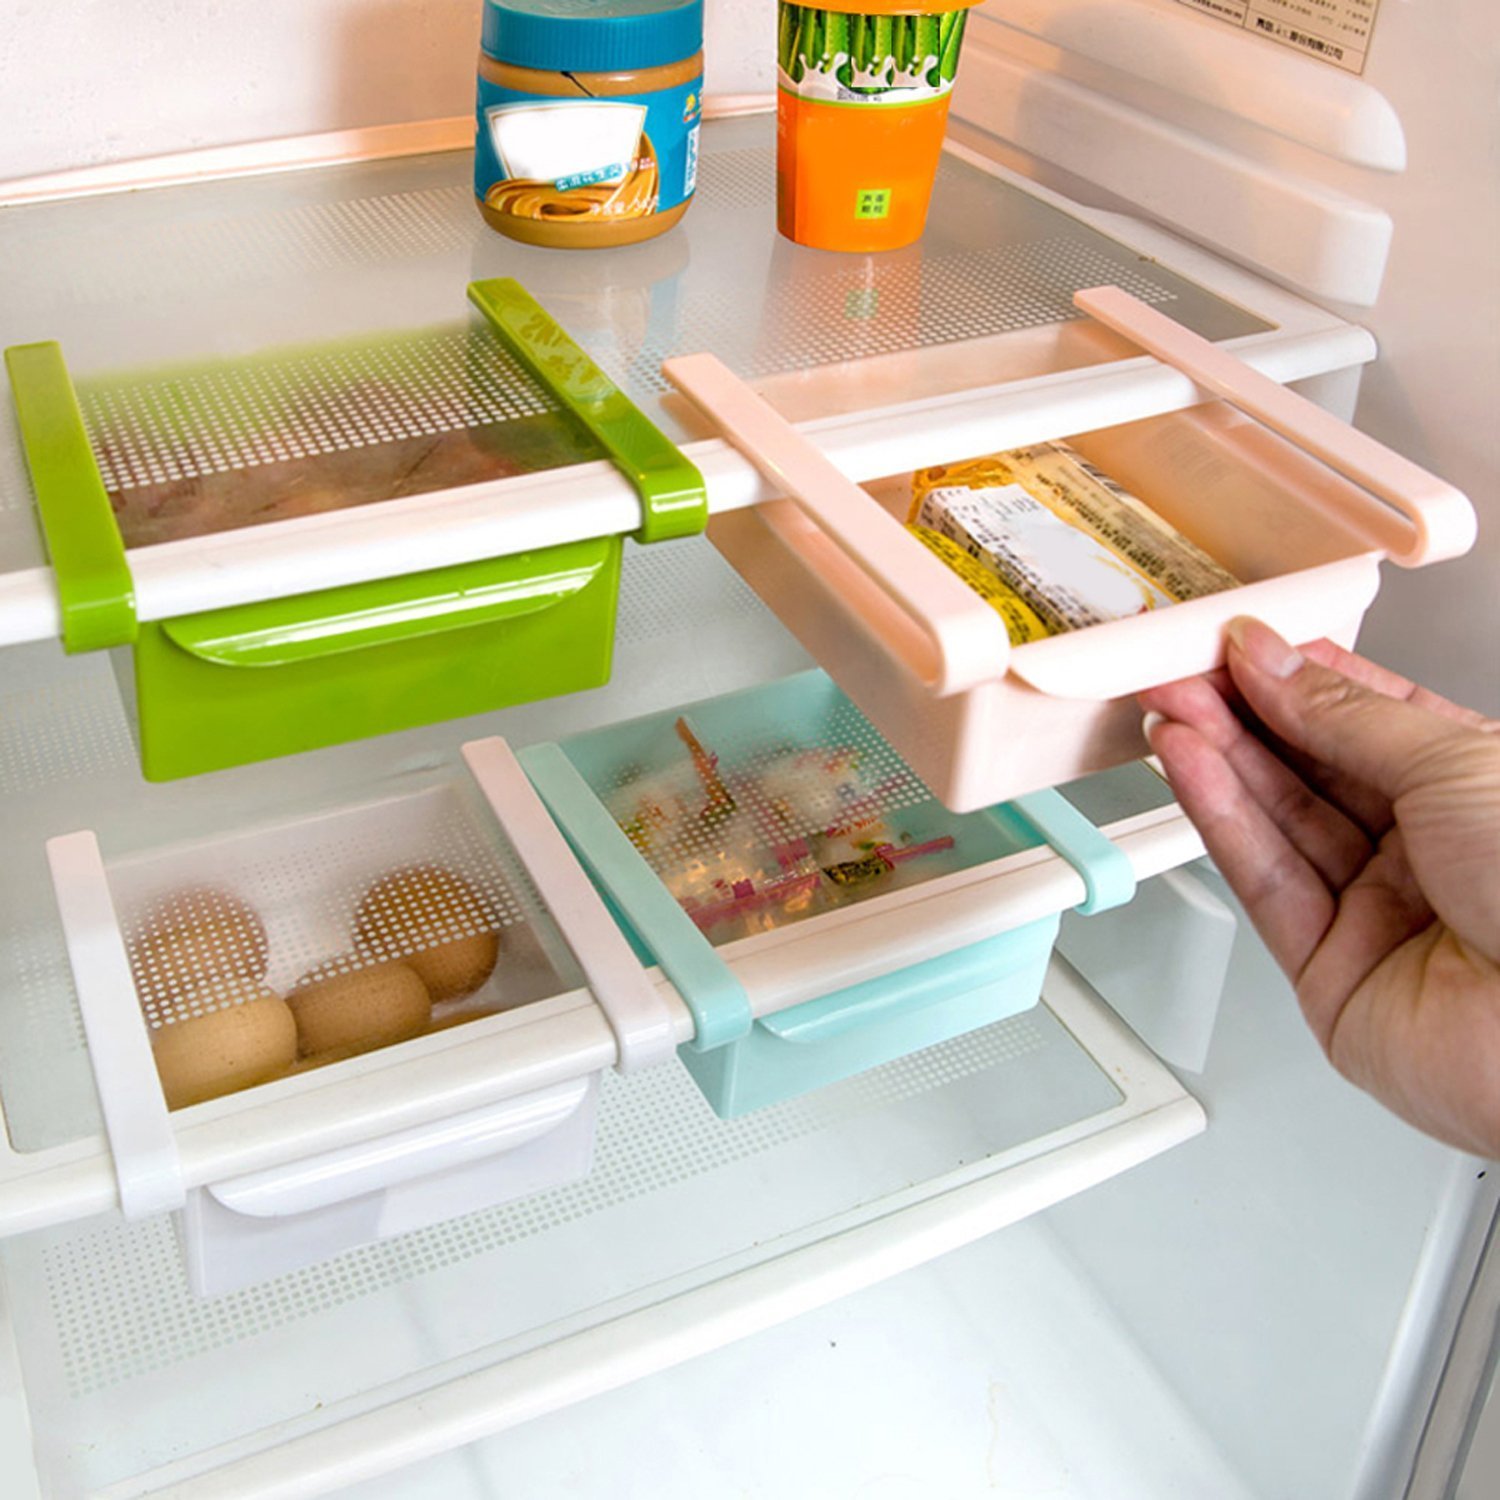 Tips for Organizing the Freezer and Keeping It Tidy